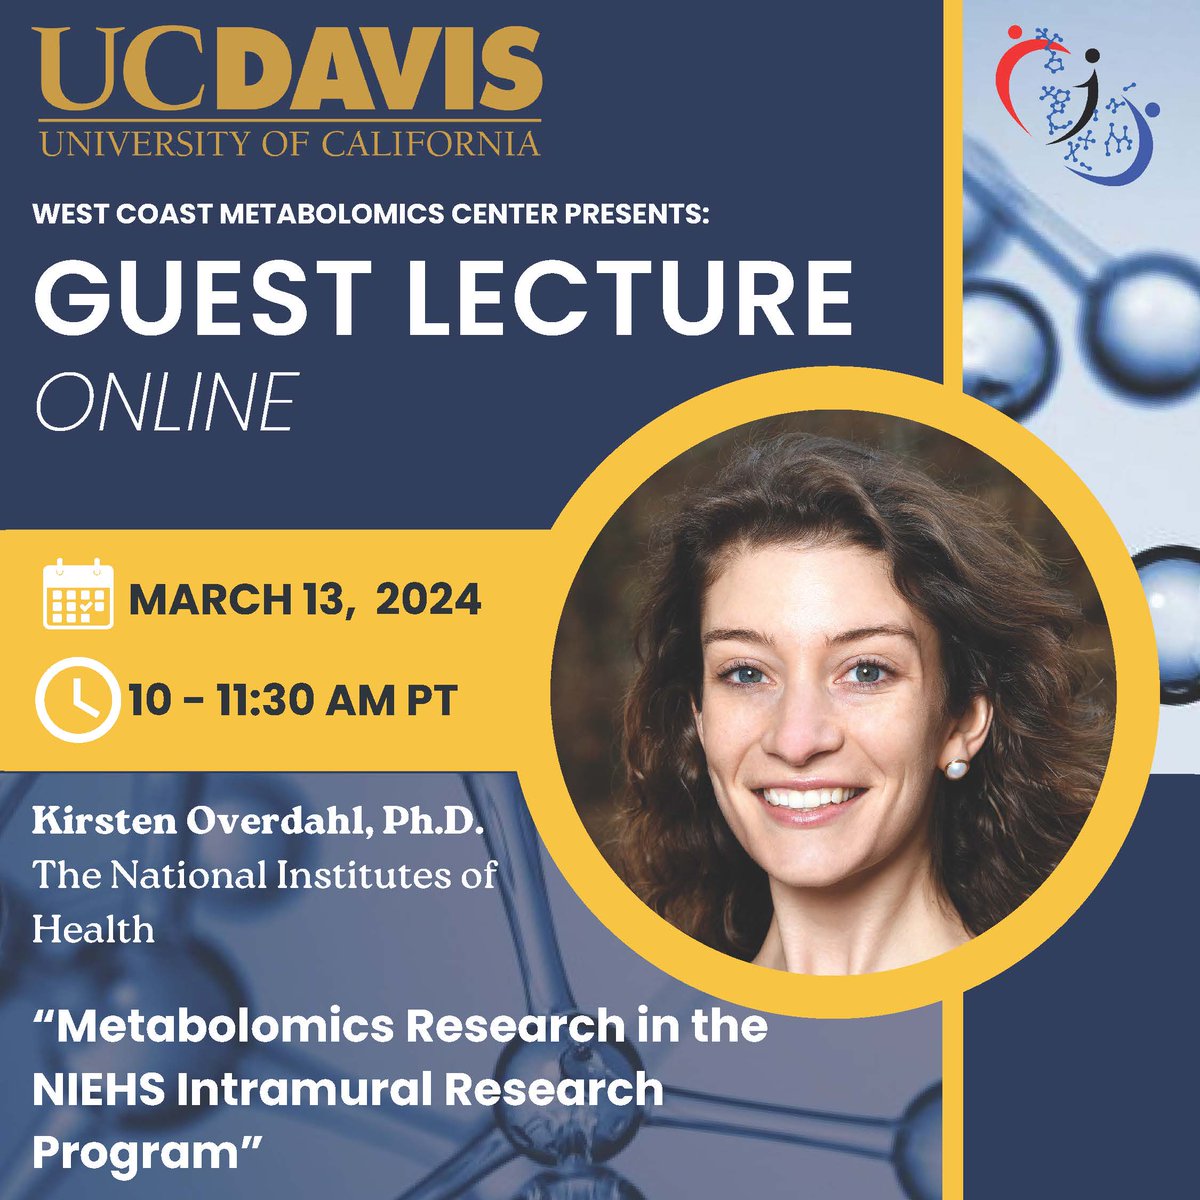 Do not forget to register for our next online guest lecture this Wednesday starting at 10 am PT with Dr. Kirsten Overdahl @KirstenOverdahl from @NIH 🔗: bit.ly/3PcAGWP This seminar was originally scheduled for Jan. but was rescheduled for March 13 at 10 - 11:30 AM PT